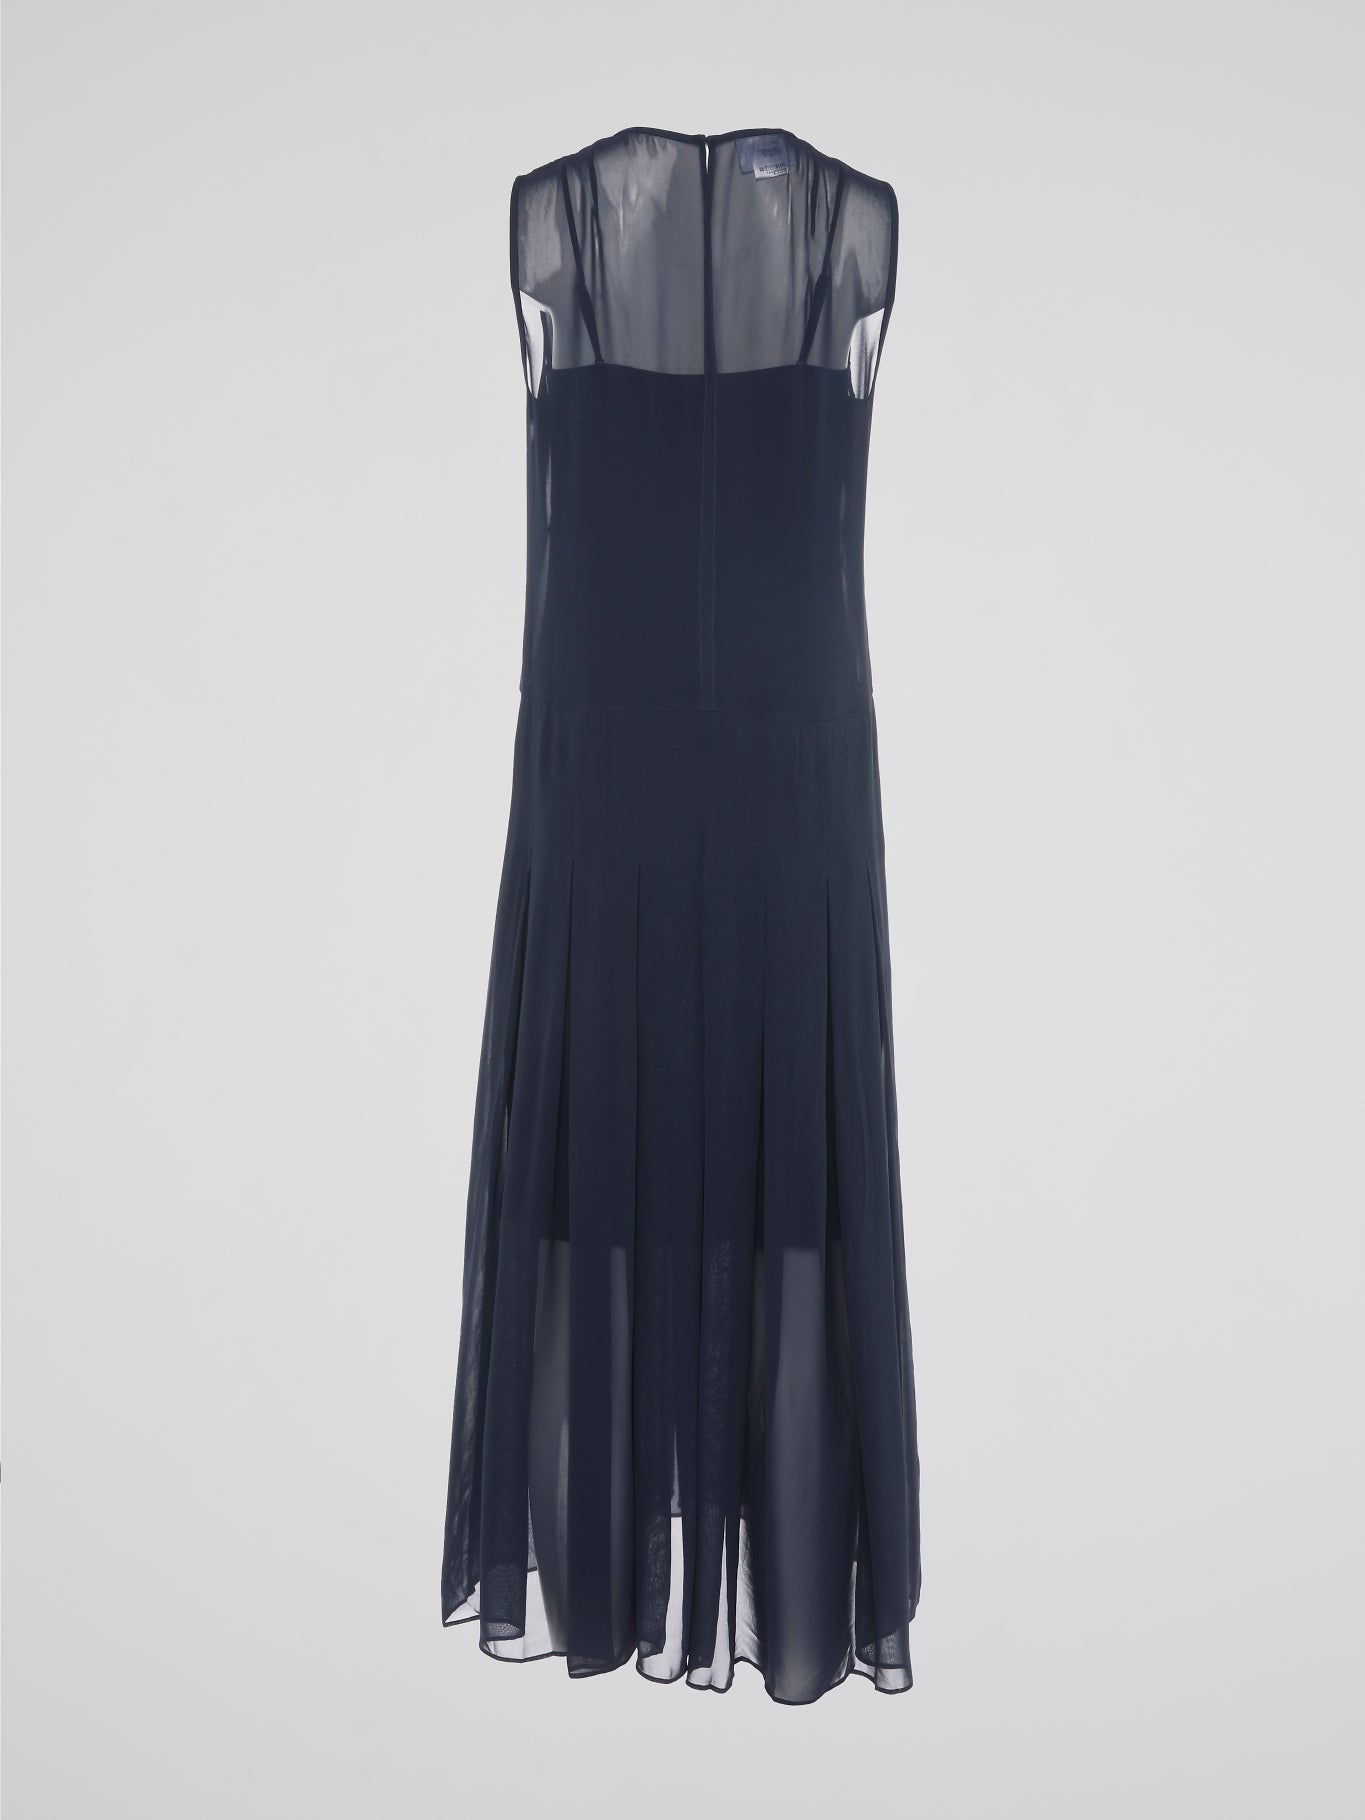 Step into elegance and grace with our Navy Pleated Maxi Dress from Akris Punto. Crafted with meticulous attention to detail, this dress showcases a flattering pleated design that beautifully flows with every step. Perfect for both formal occasions and casual outings, it's time to make a statement and be the epitome of sophistication.